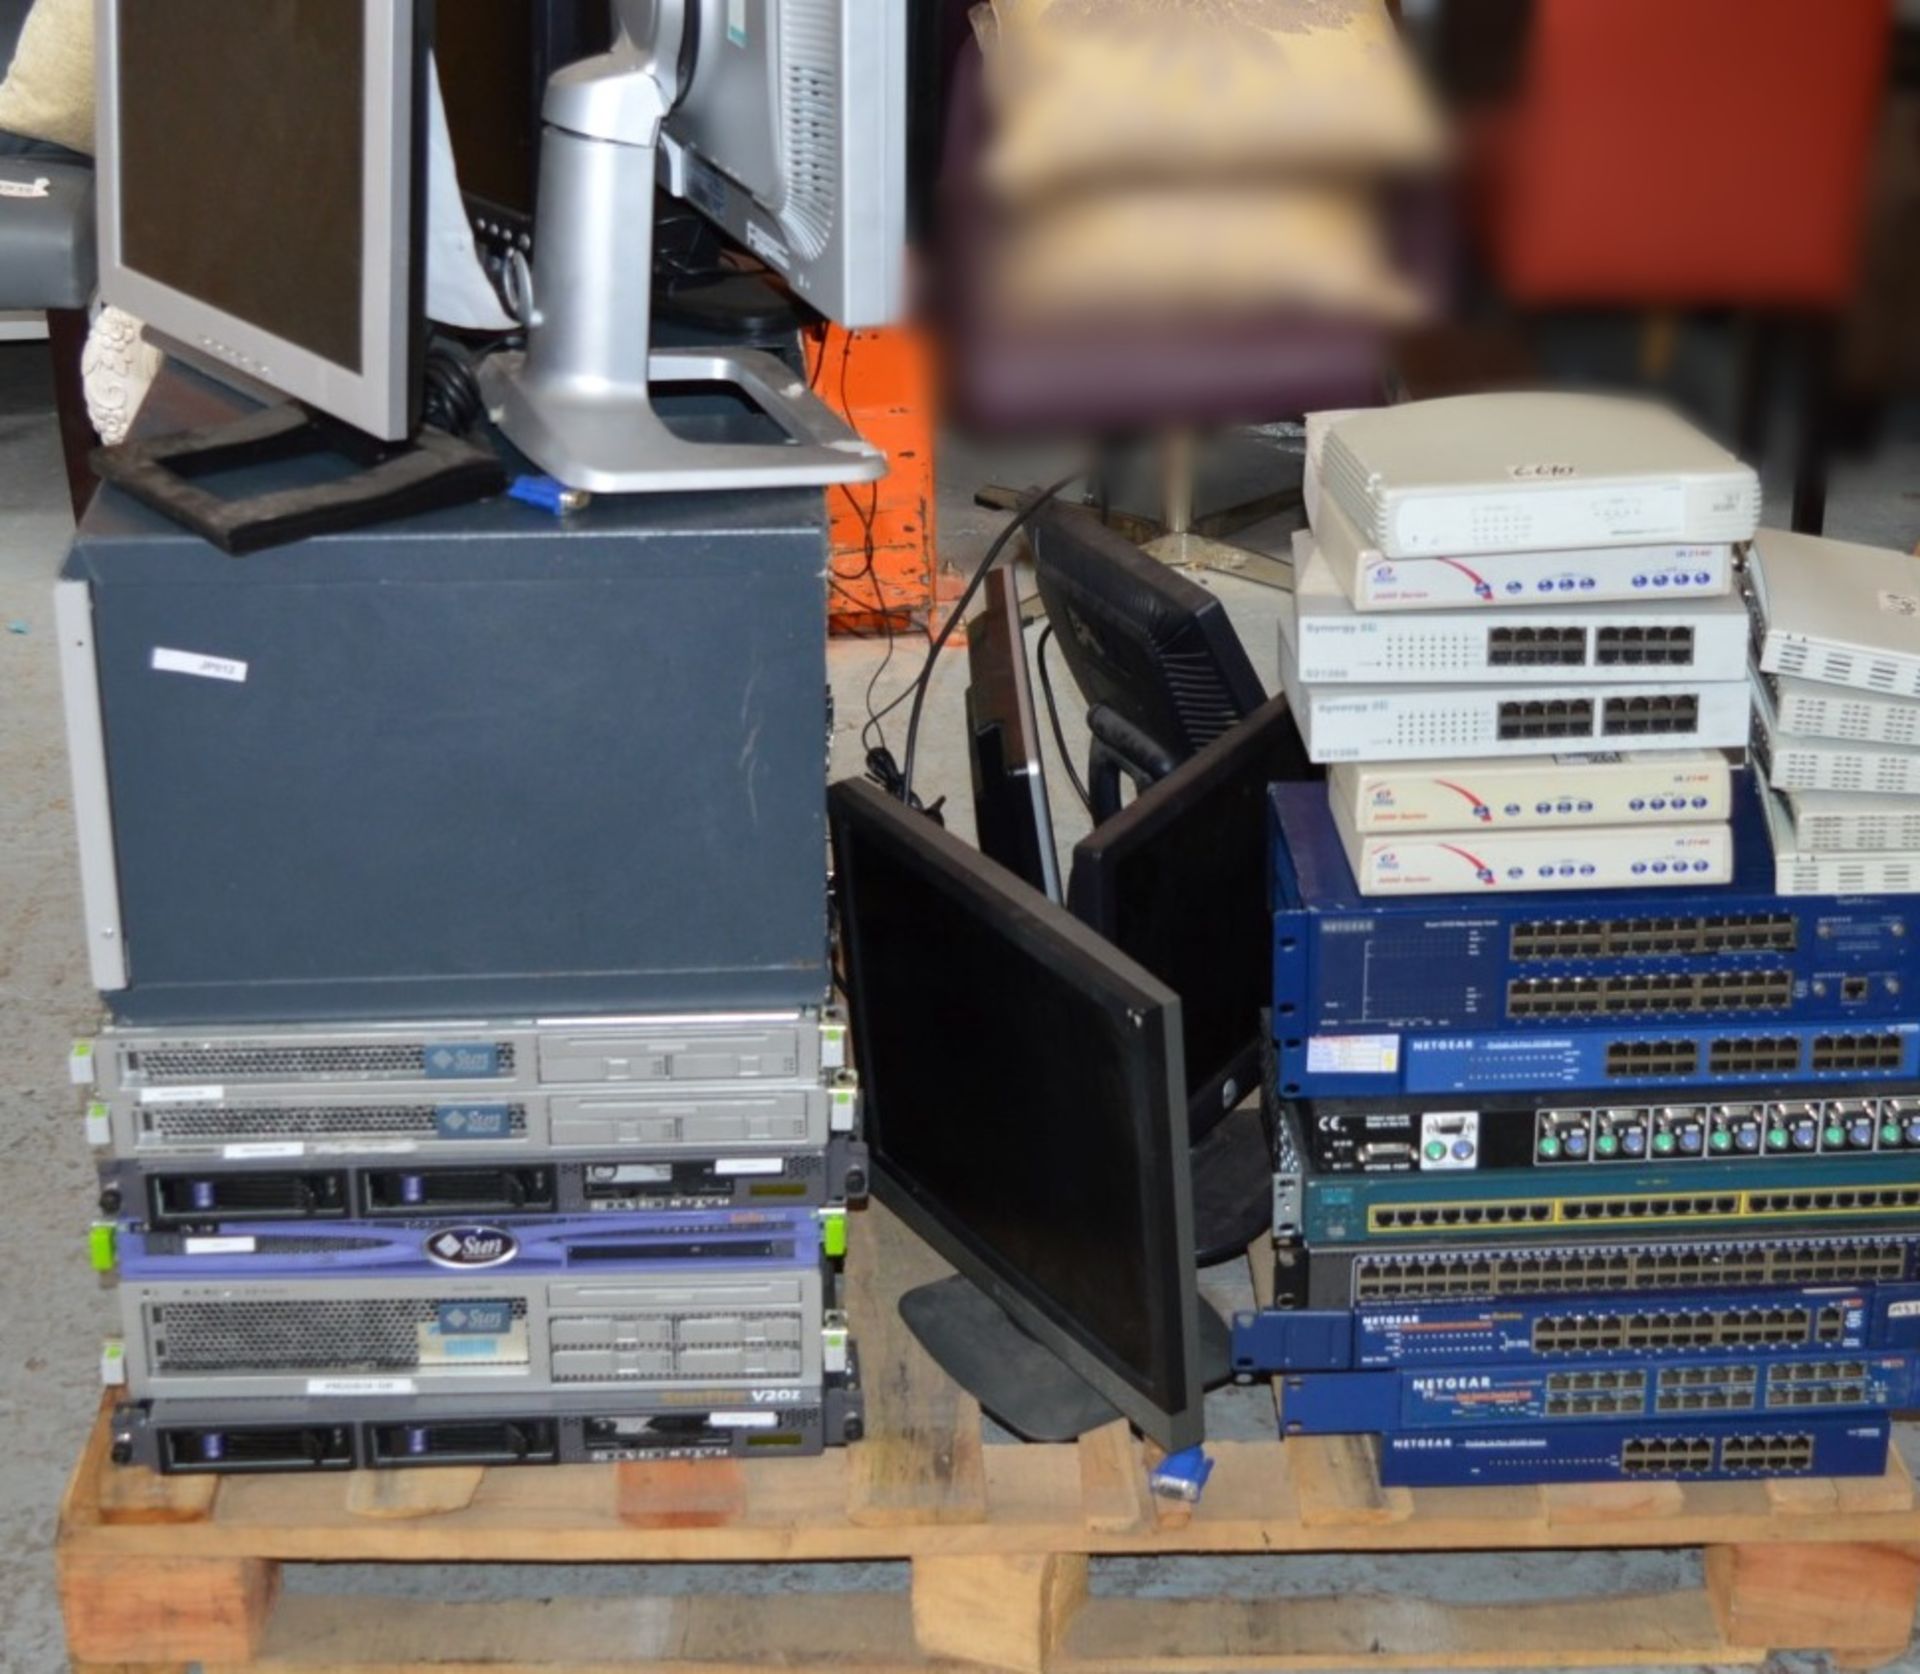 Assorted Pallet of IT Server and Monitor Equipment - Includes 6 x Various Sun Servers, 7 x Netgear